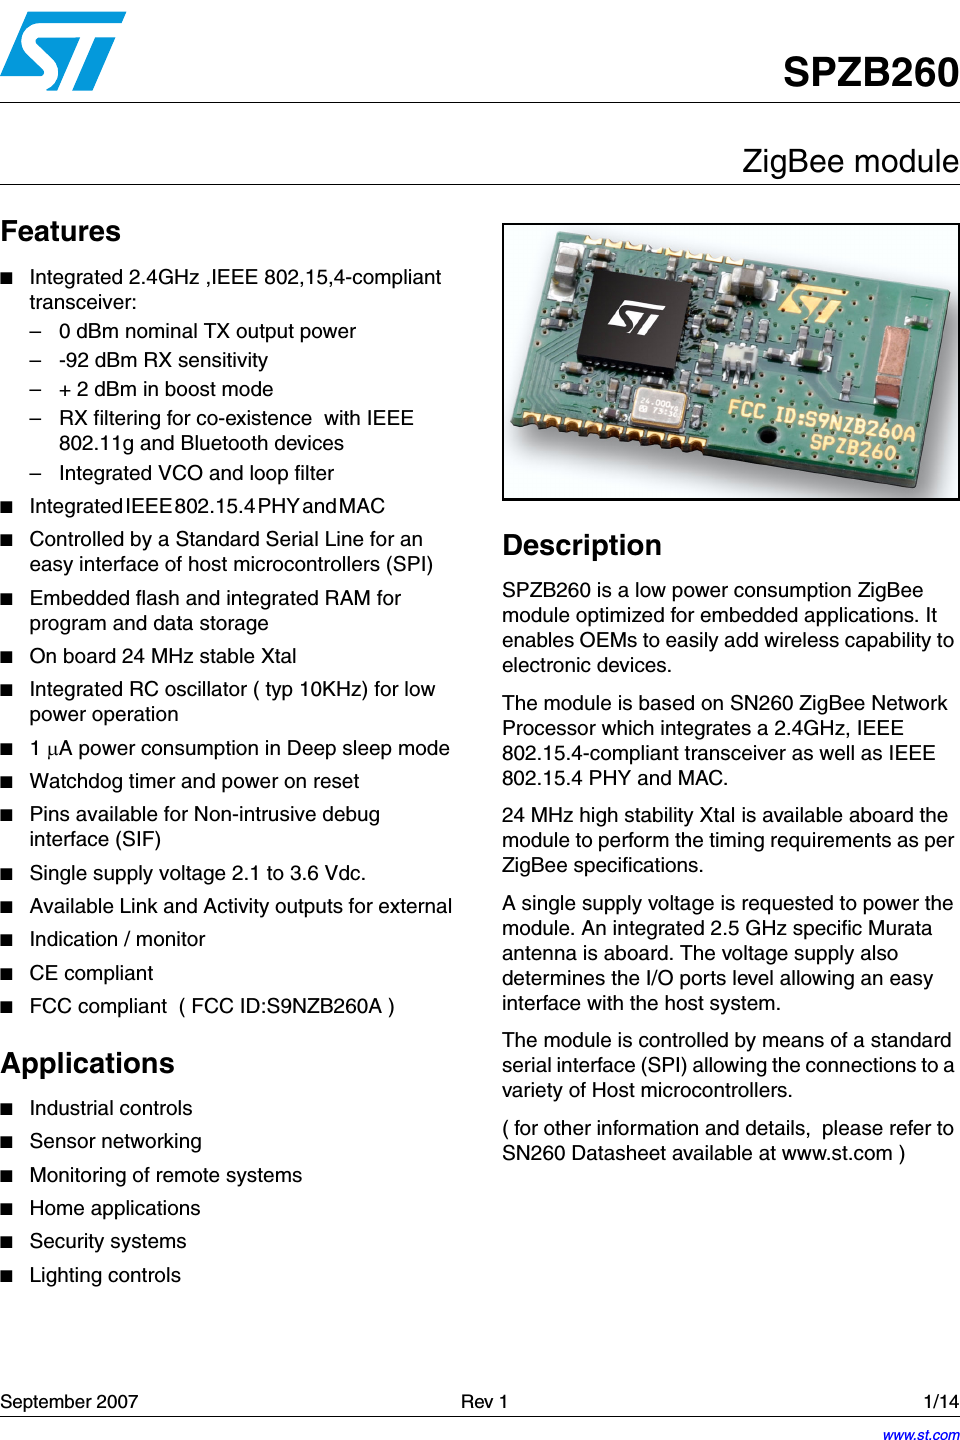 September 2007   Rev 1 1/1414SPZB260ZigBee moduleFeatures■Integrated 2.4GHz ,IEEE 802,15,4-compliant transceiver:– 0 dBm nominal TX output power – -92 dBm RX sensitivity– + 2 dBm in boost mode– RX filtering for co-existence  with IEEE 802.11g and Bluetooth devices– Integrated VCO and loop filter■Integrated IEEE 802.15.4 PHY and MAC                                     ■Controlled by a Standard Serial Line for an easy interface of host microcontrollers (SPI)■Embedded flash and integrated RAM for program and data storage ■On board 24 MHz stable Xtal■Integrated RC oscillator ( typ 10KHz) for low power operation■1 µA power consumption in Deep sleep mode■Watchdog timer and power on reset■Pins available for Non-intrusive debug interface (SIF)■Single supply voltage 2.1 to 3.6 Vdc.■Available Link and Activity outputs for external ■Indication / monitor ■CE compliant■FCC compliant  ( FCC ID:S9NZB260A )Applications■Industrial controls■Sensor networking■Monitoring of remote systems ■Home applications■Security systems■Lighting controlsDescriptionSPZB260 is a low power consumption ZigBee module optimized for embedded applications. It enables OEMs to easily add wireless capability to electronic devices.The module is based on SN260 ZigBee Network Processor which integrates a 2.4GHz, IEEE 802.15.4-compliant transceiver as well as IEEE 802.15.4 PHY and MAC.24 MHz high stability Xtal is available aboard the module to perform the timing requirements as per ZigBee specifications.A single supply voltage is requested to power the module. An integrated 2.5 GHz specific Murata antenna is aboard. The voltage supply also determines the I/O ports level allowing an easy interface with the host system.The module is controlled by means of a standard serial interface (SPI) allowing the connections to a variety of Host microcontrollers.( for other information and details,  please refer to SN260 Datasheet available at www.st.com )www.st.com